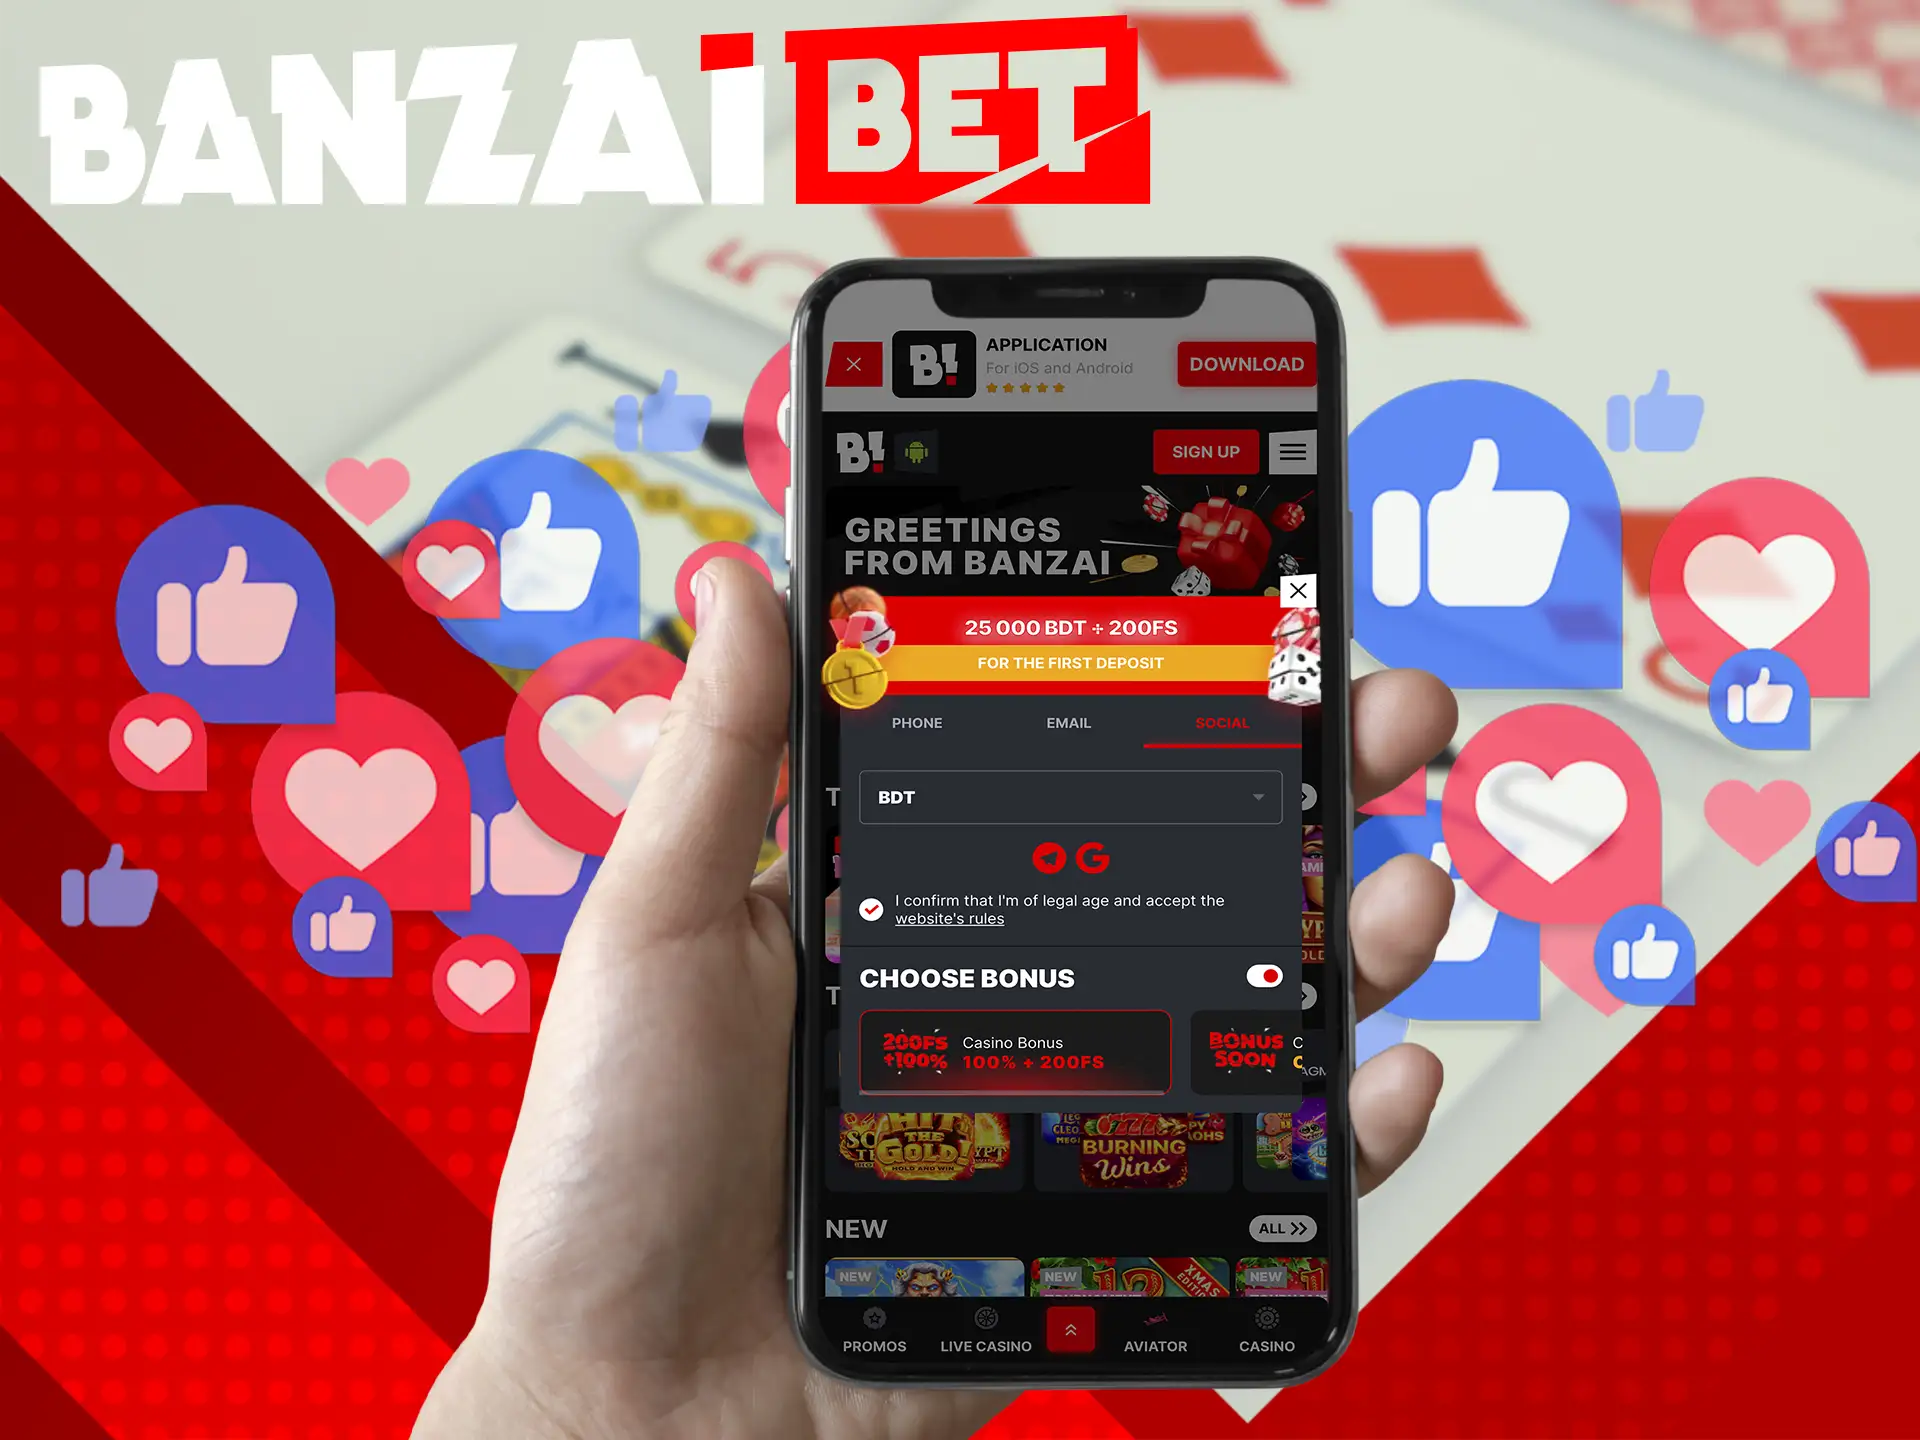 If you have a social media profile, you can instantly create a Banzai Bet account, and start playing.